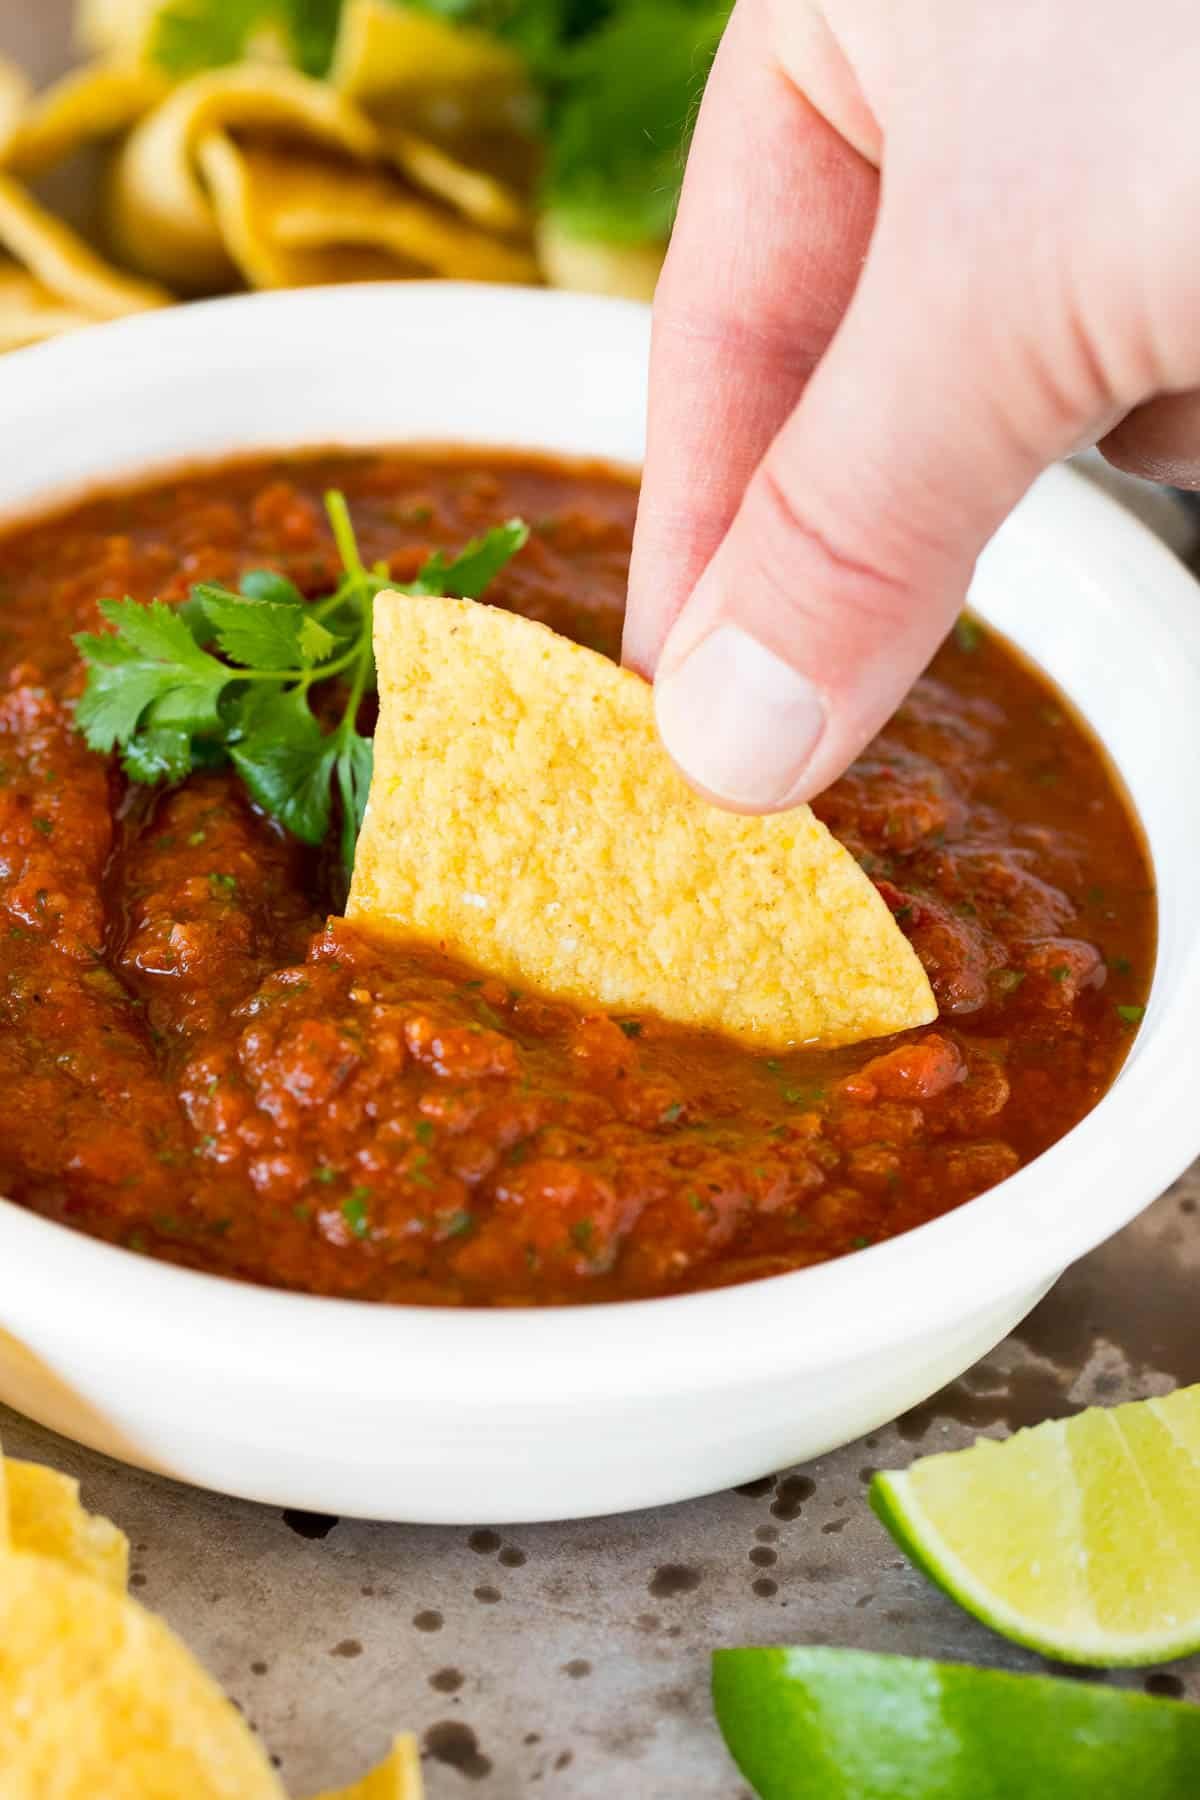 A chip scooping up a serving of tomato salsa.